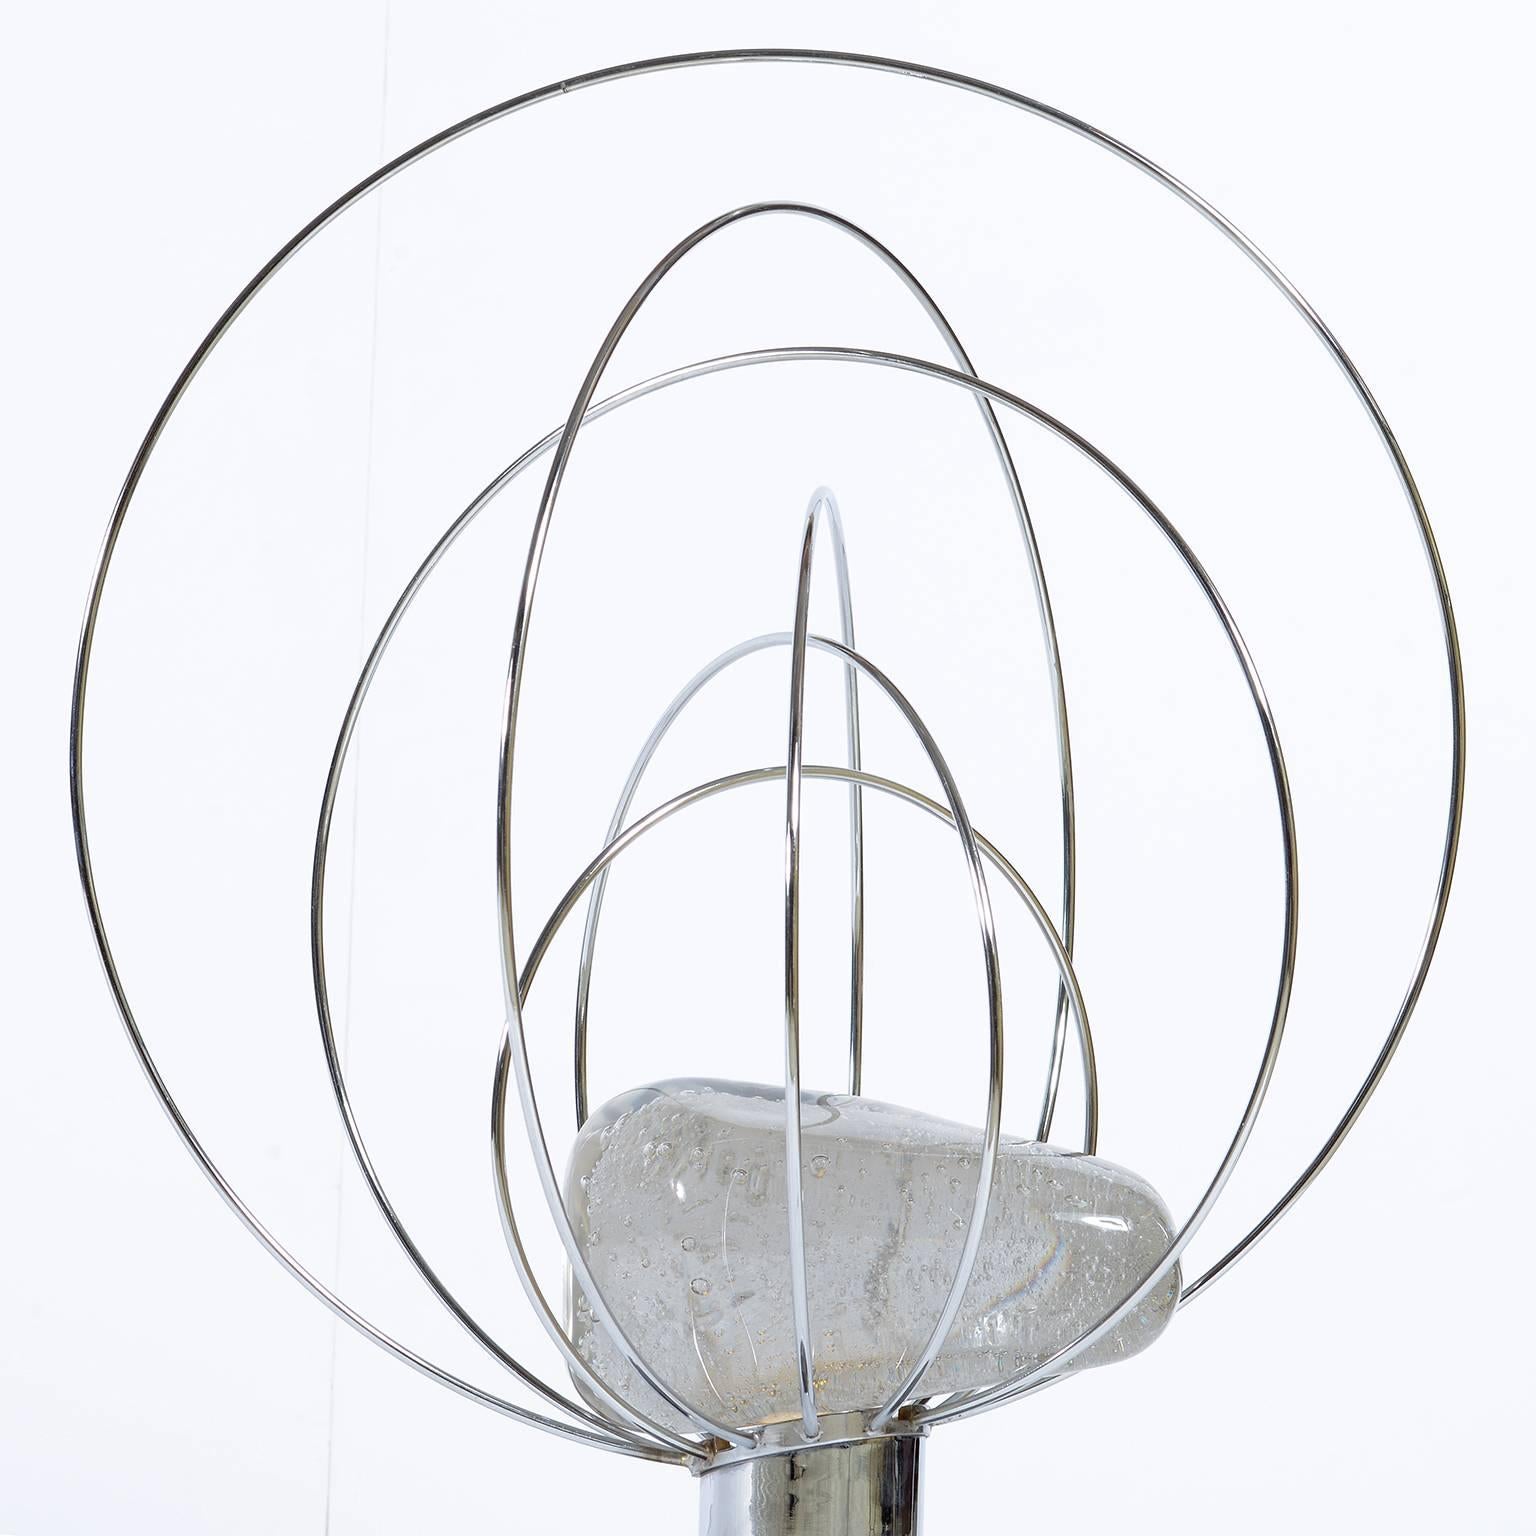 Glass Angelo Brotto for Esperia Midcentury Modern chrome and Murano glass table lamp.